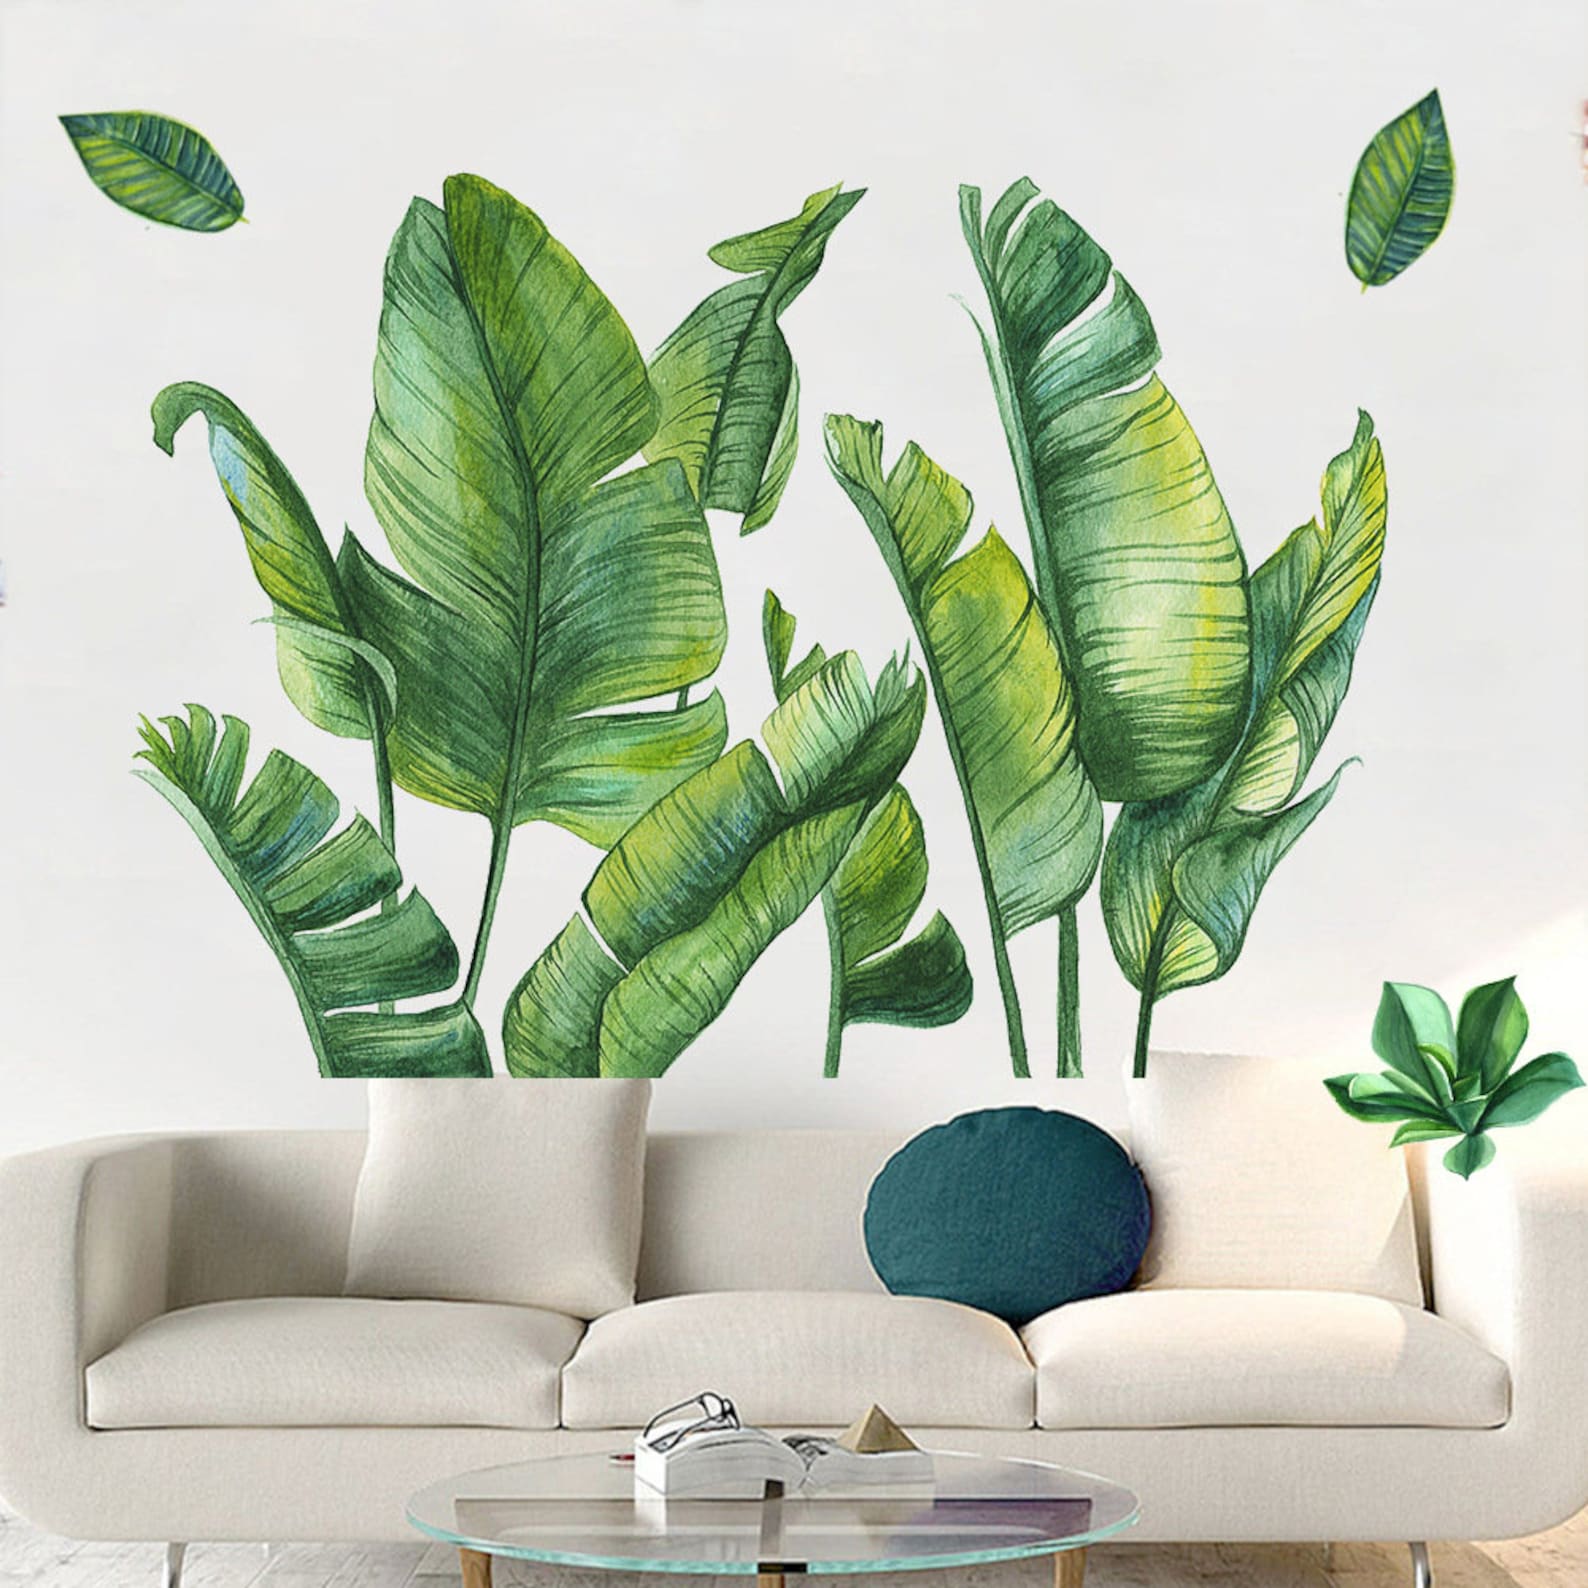 Big leaf wall decaltropical Green leaves wall stickers | Etsy